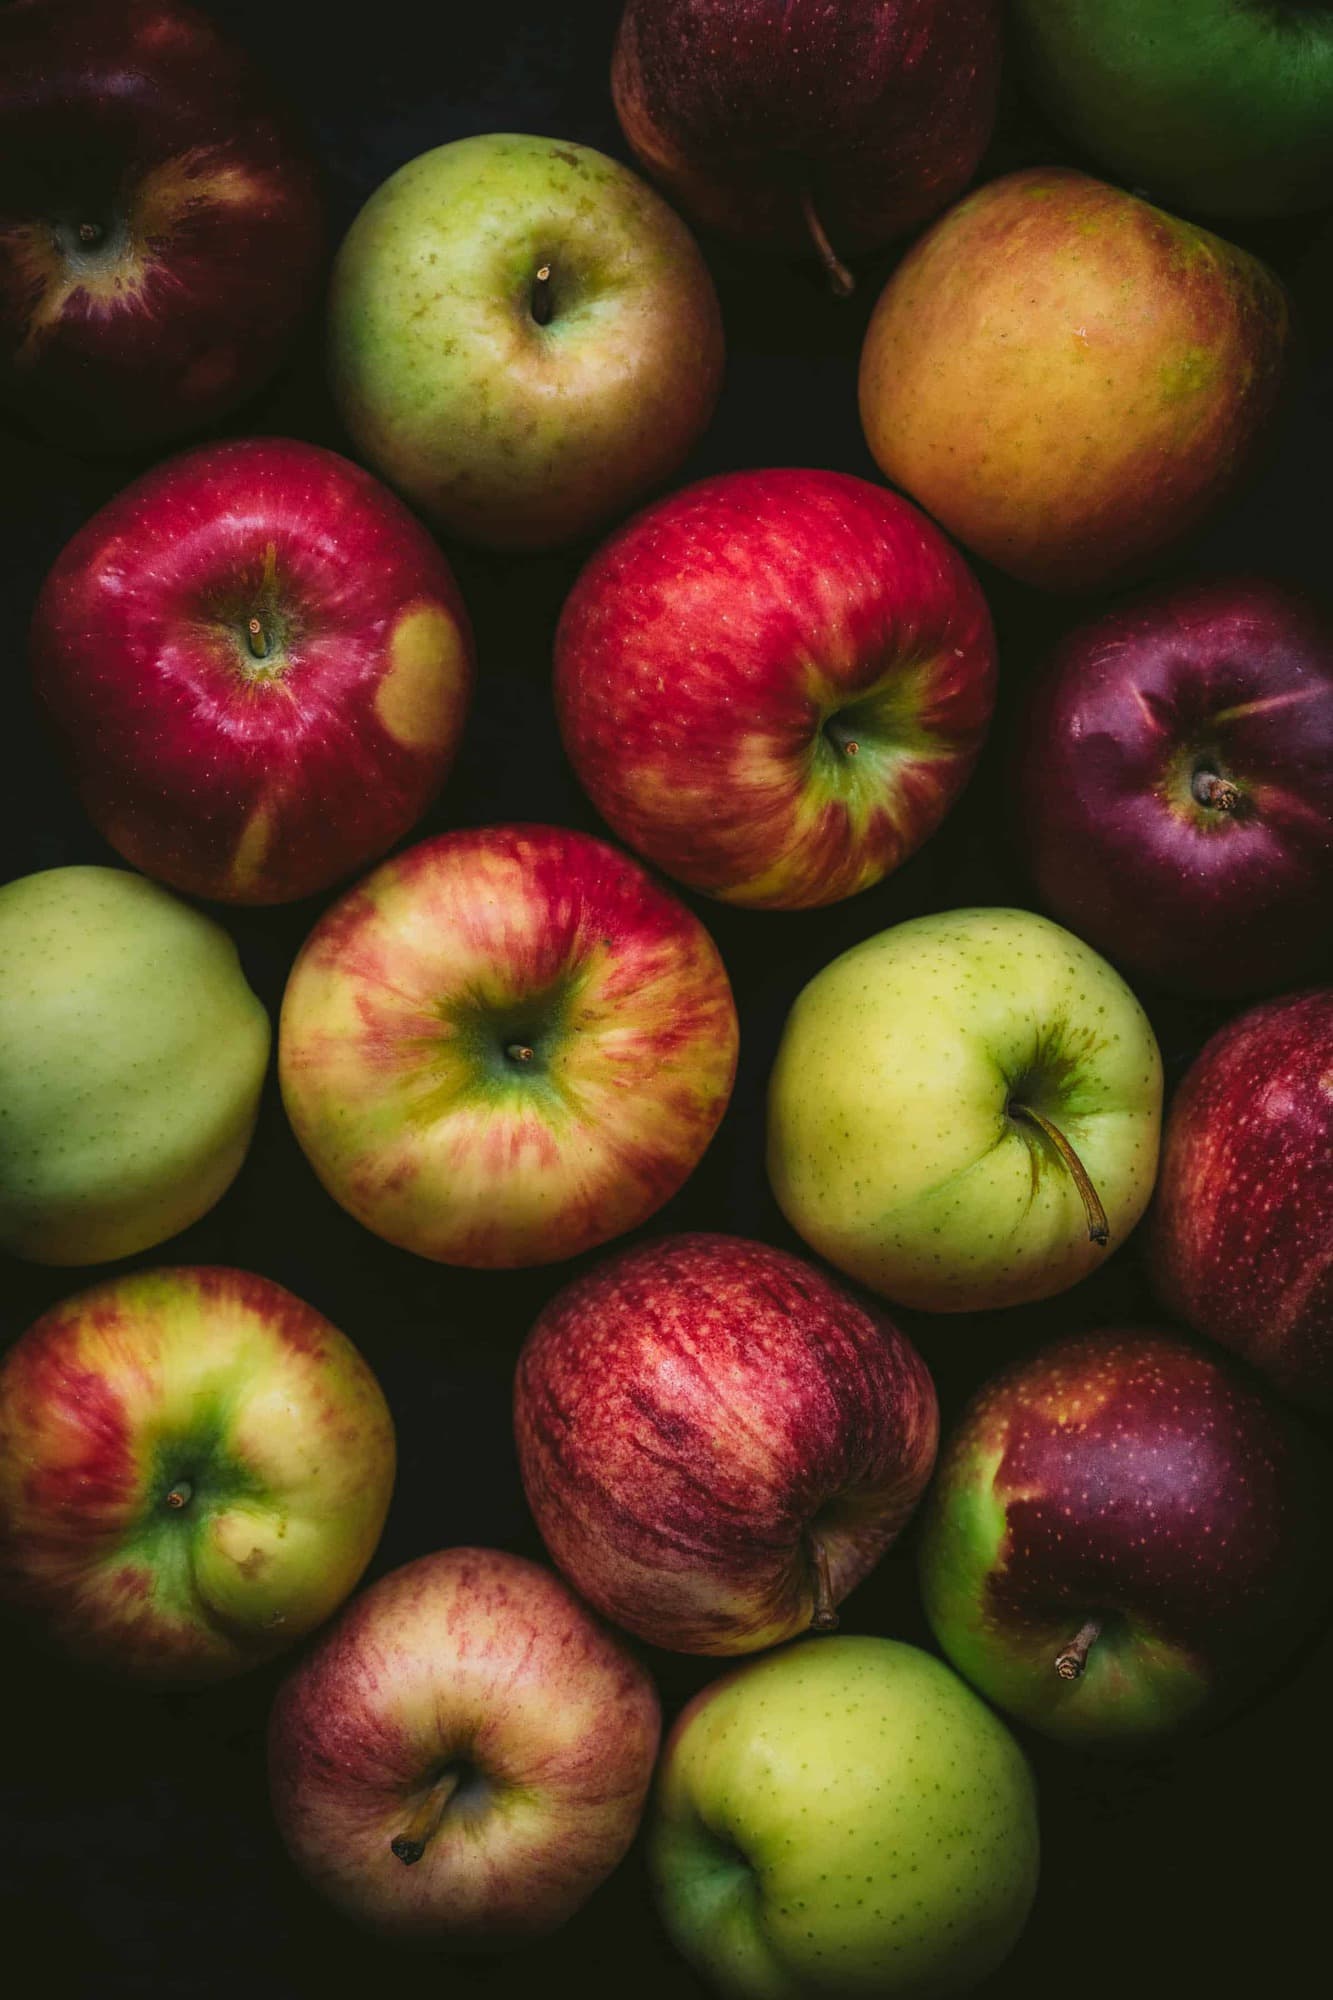 beautiful photography of apple varieties on a dark background